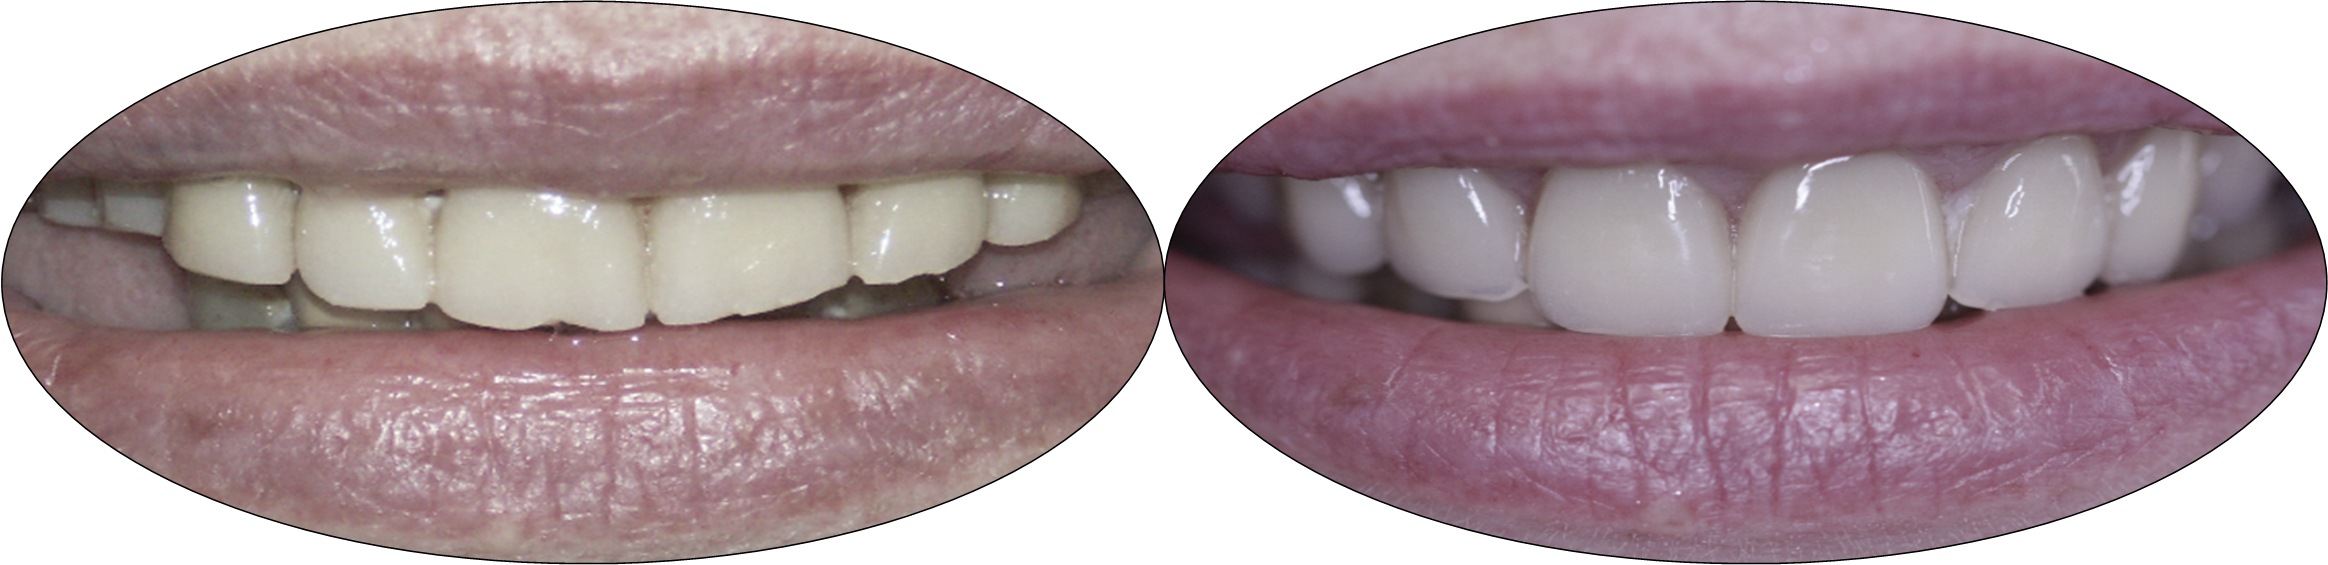 Smile photos, before and after porcelain crowns